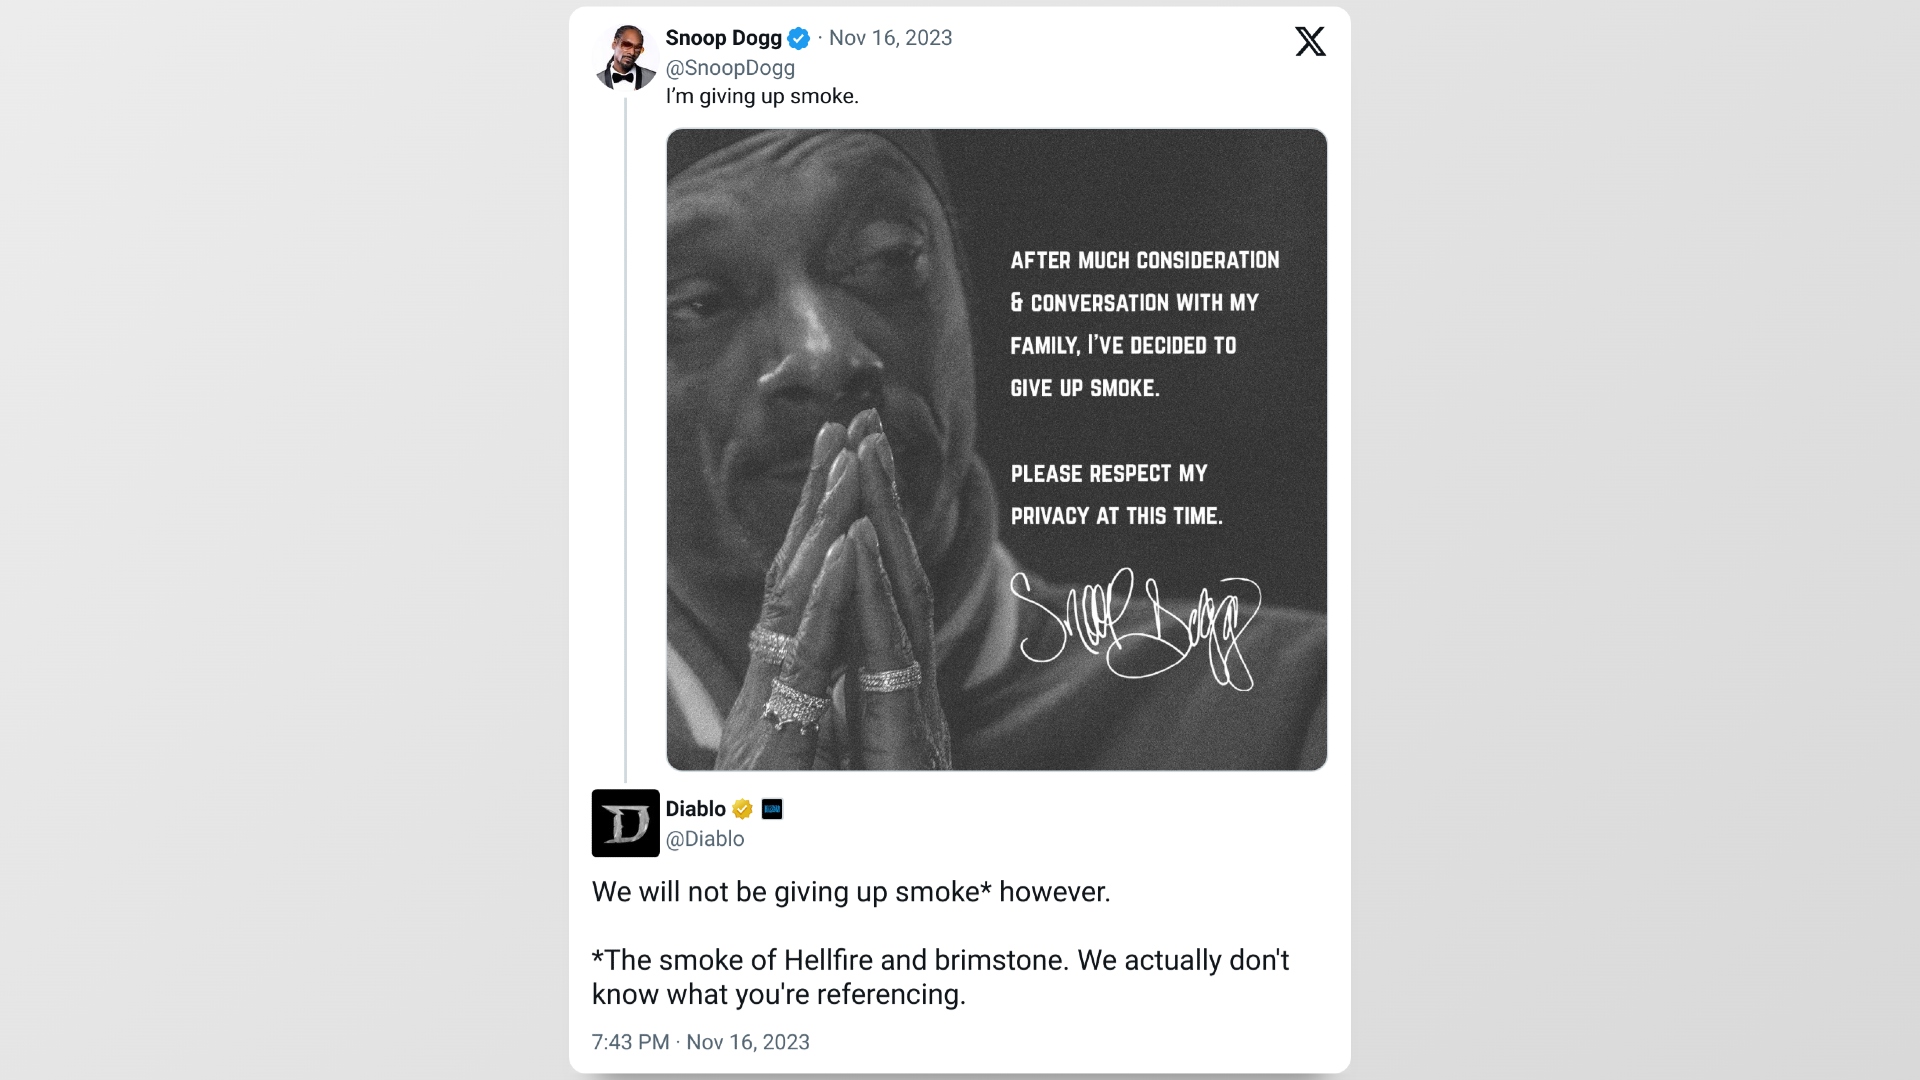 Snoop Dogg's original post with Diablo 4's follow-up comment about smoke